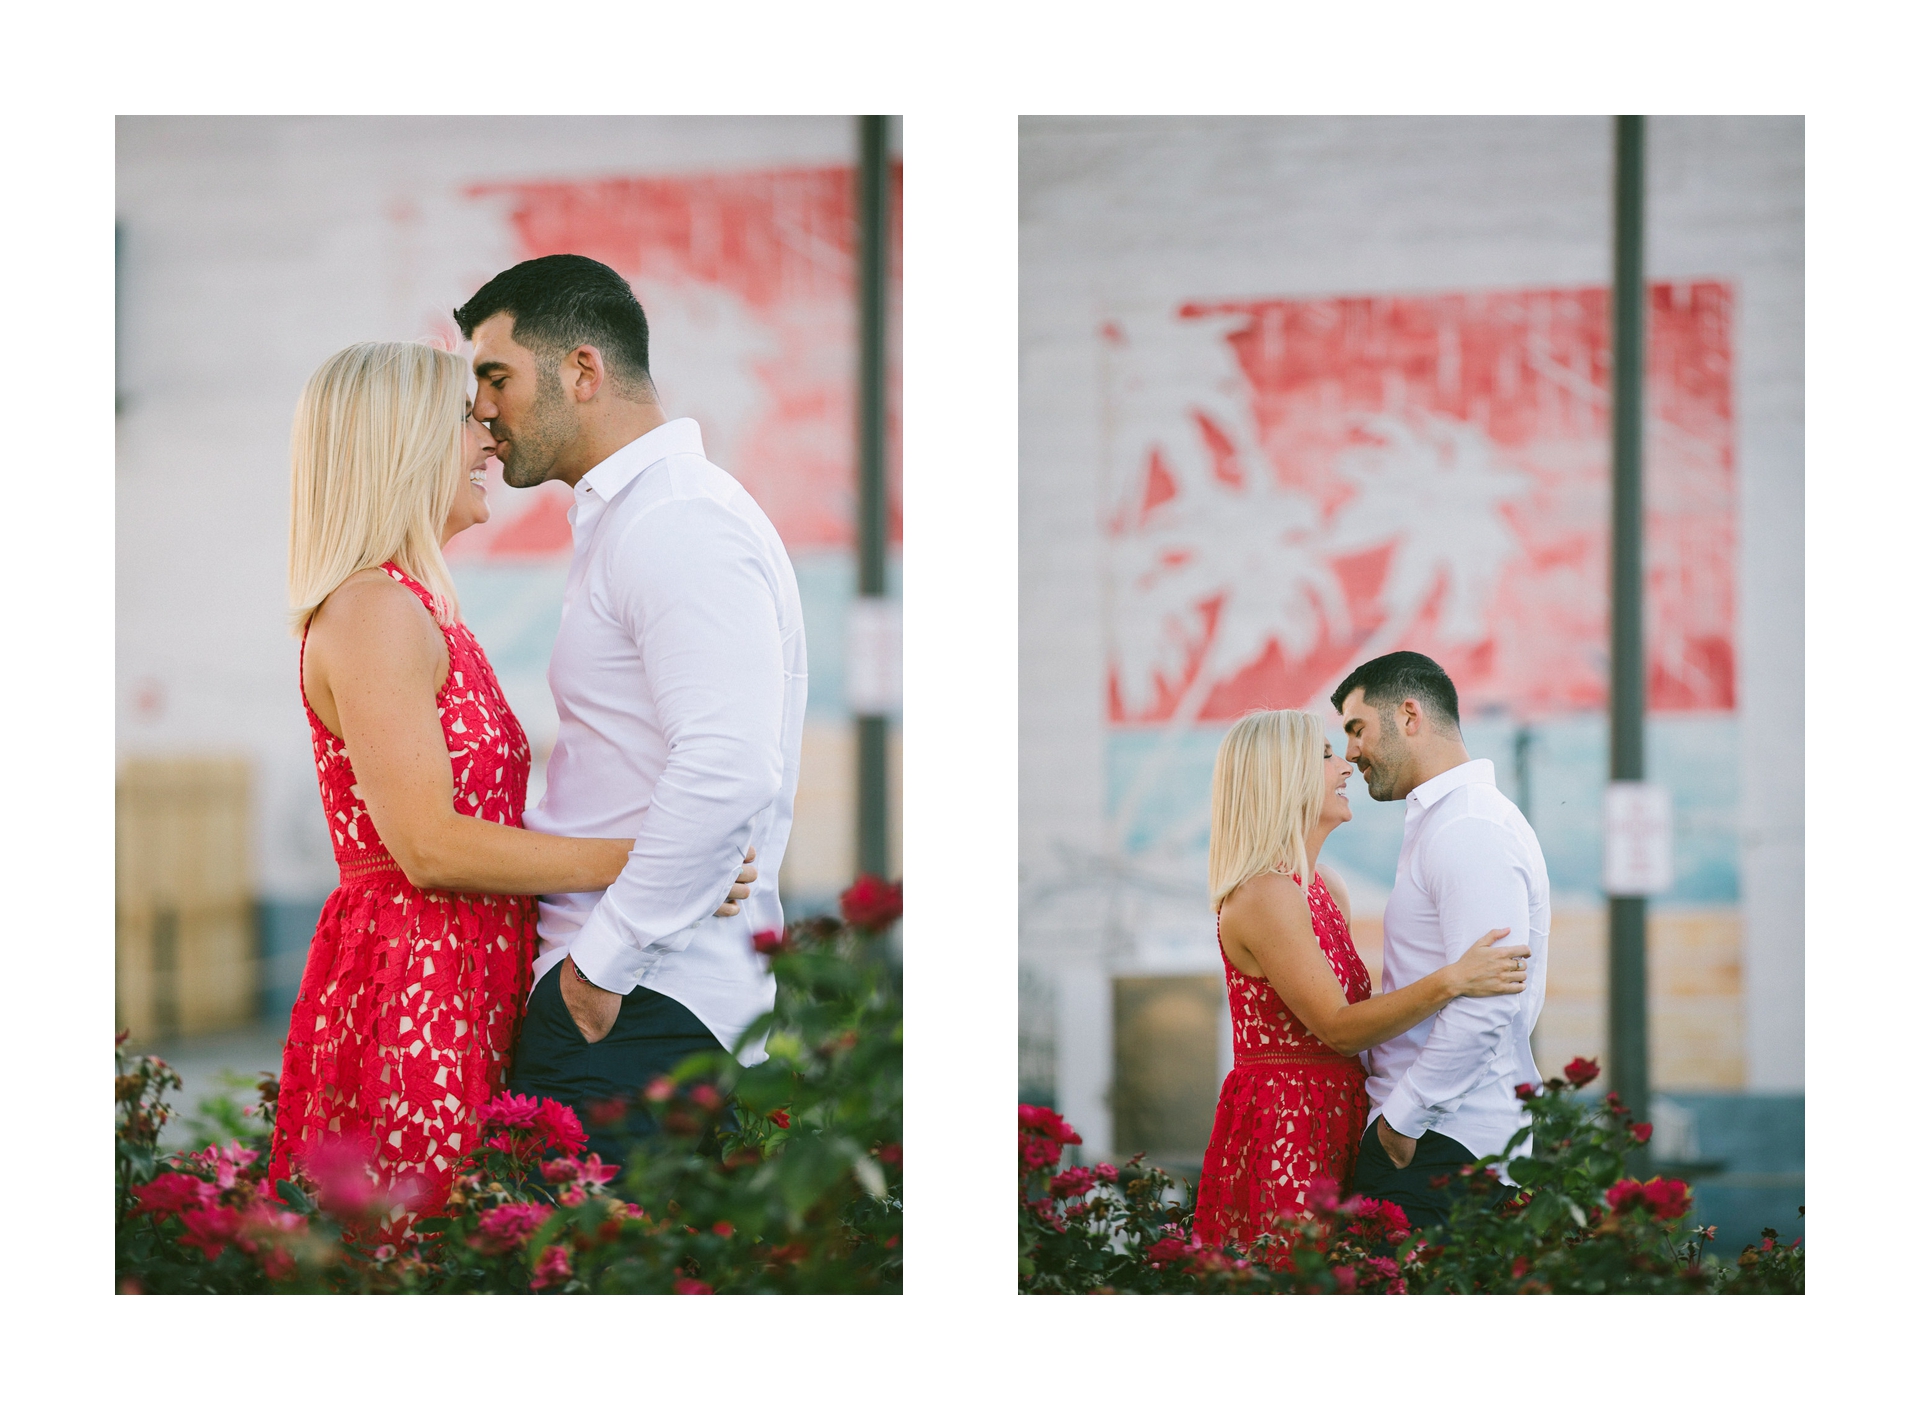 Sara Shookman Angelo DiFranco Engagement photos in cleveland by too much awesomeness photography 10.jpg